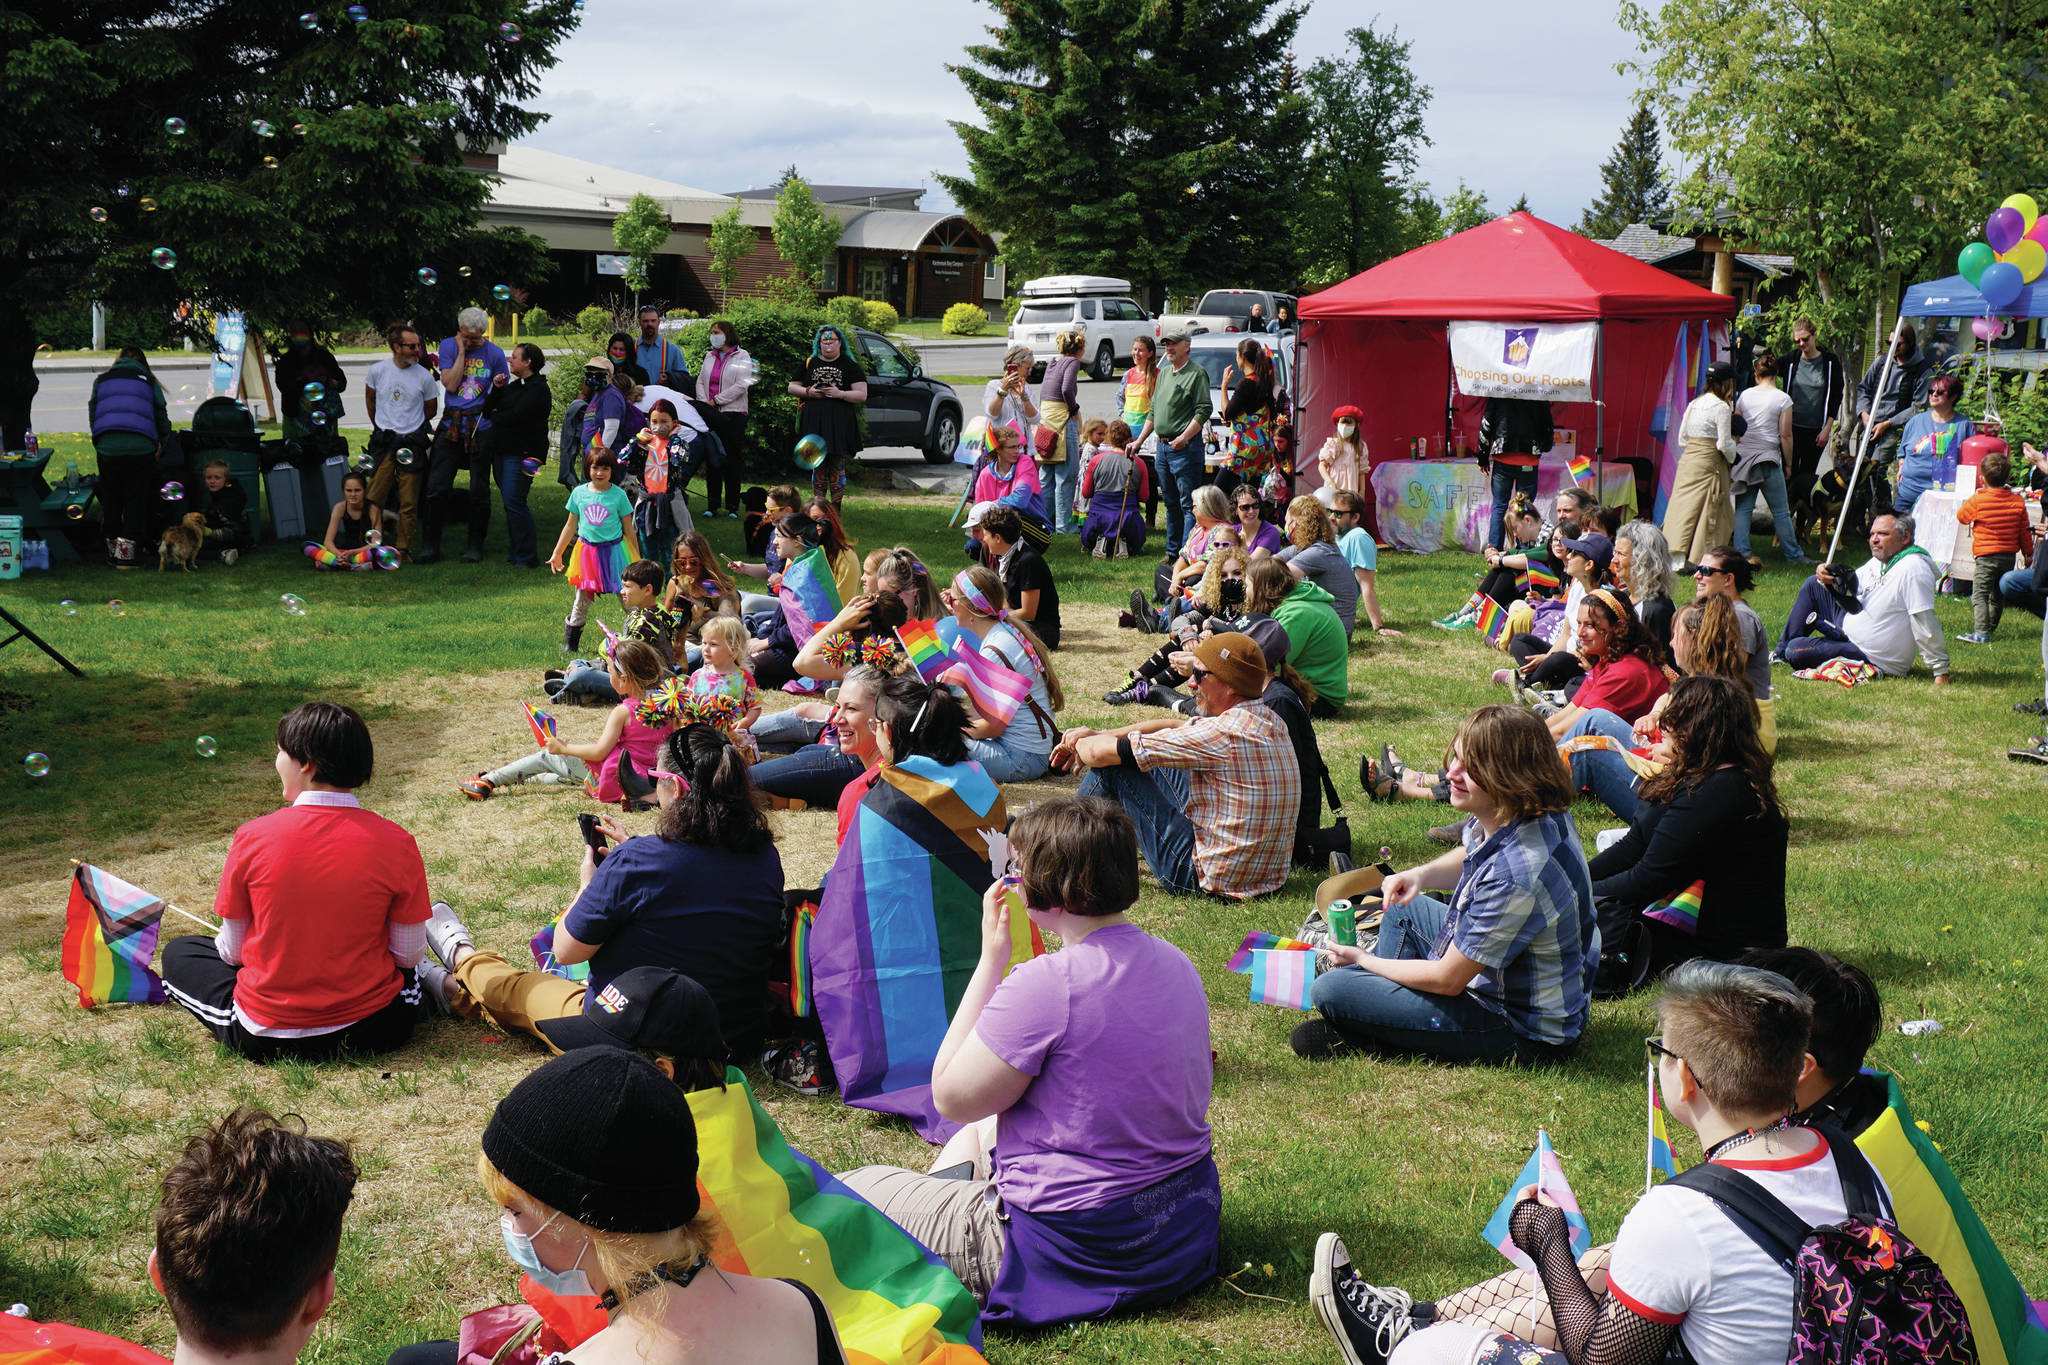 People listen to speakers at a combined Pride and Juneteenth event on Saturday, June 19, 2021, at Wisdom, Knowledge, Faith and Love Park in Homer, Alaska. (Photo by Michael Armstrong/Homer News)